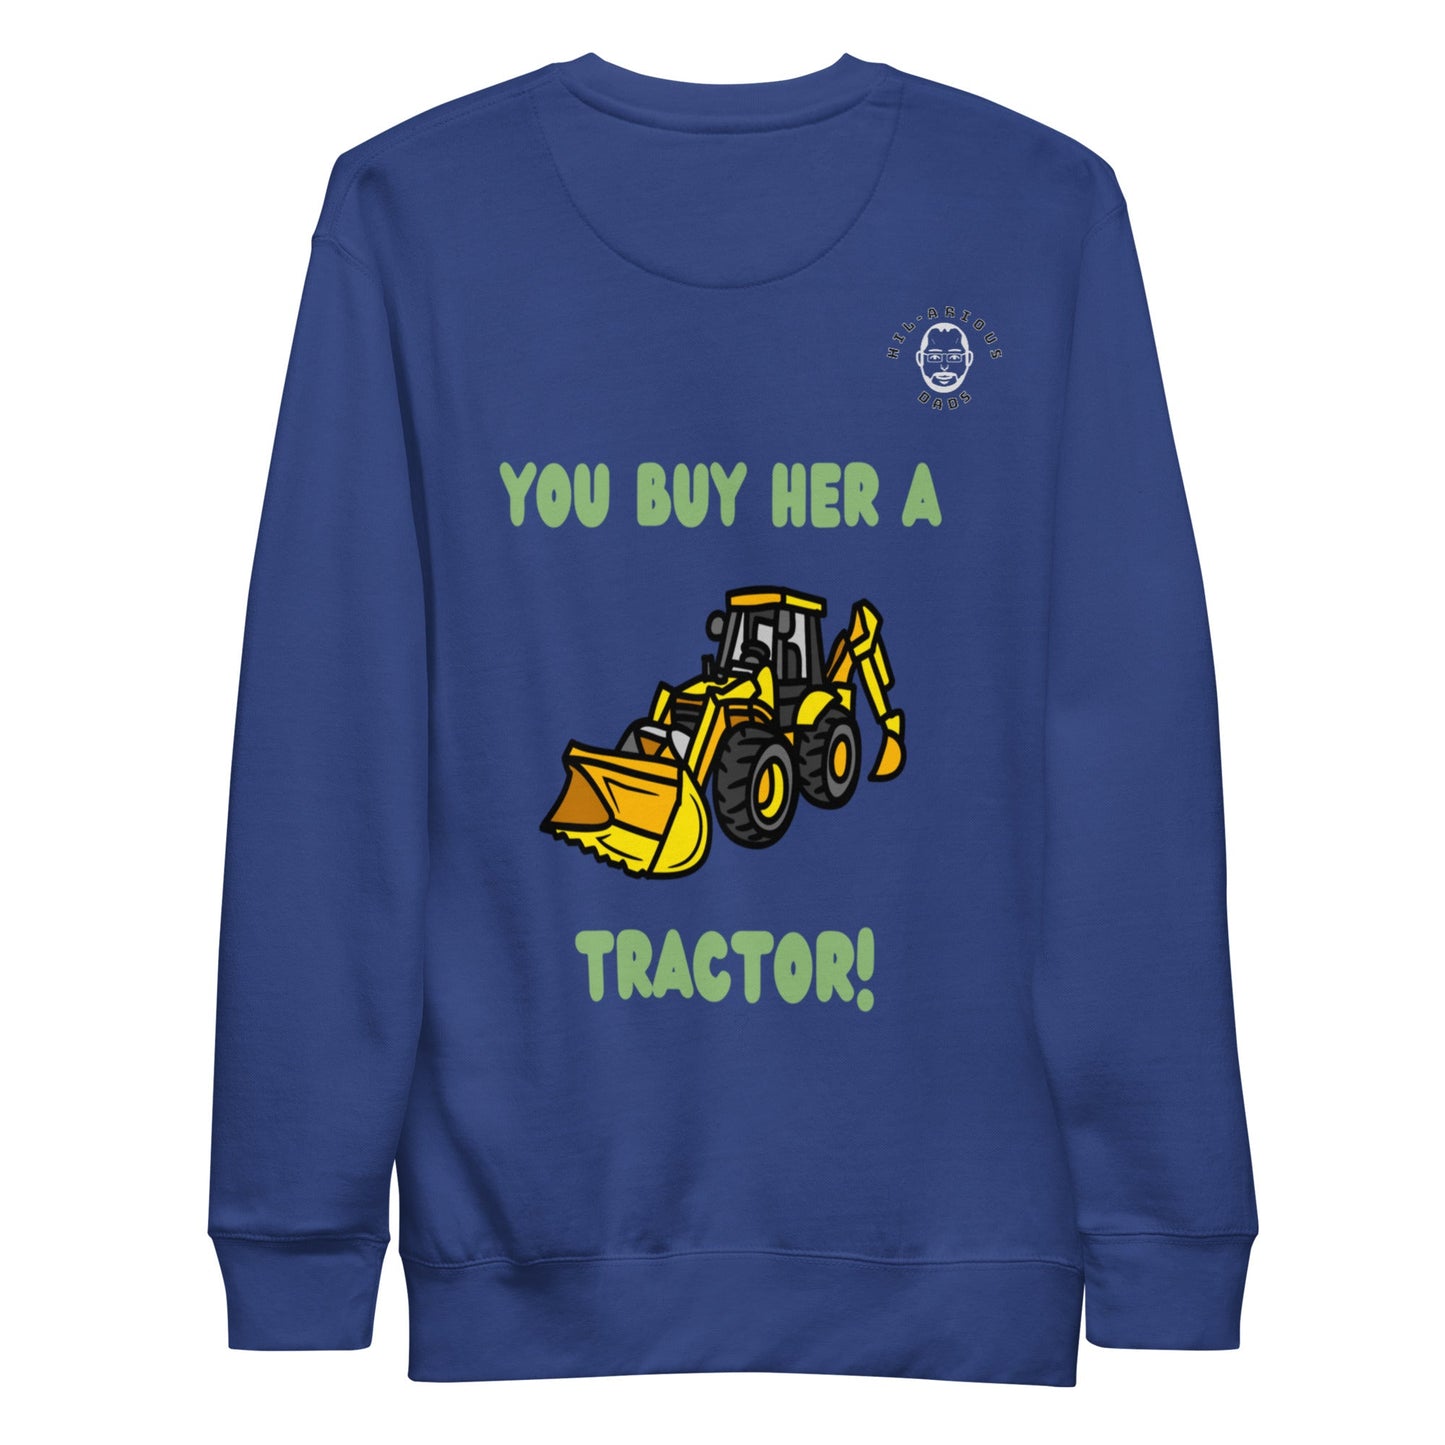 How do you get a country girl's attention?-Sweatshirt - Hil-arious Dads